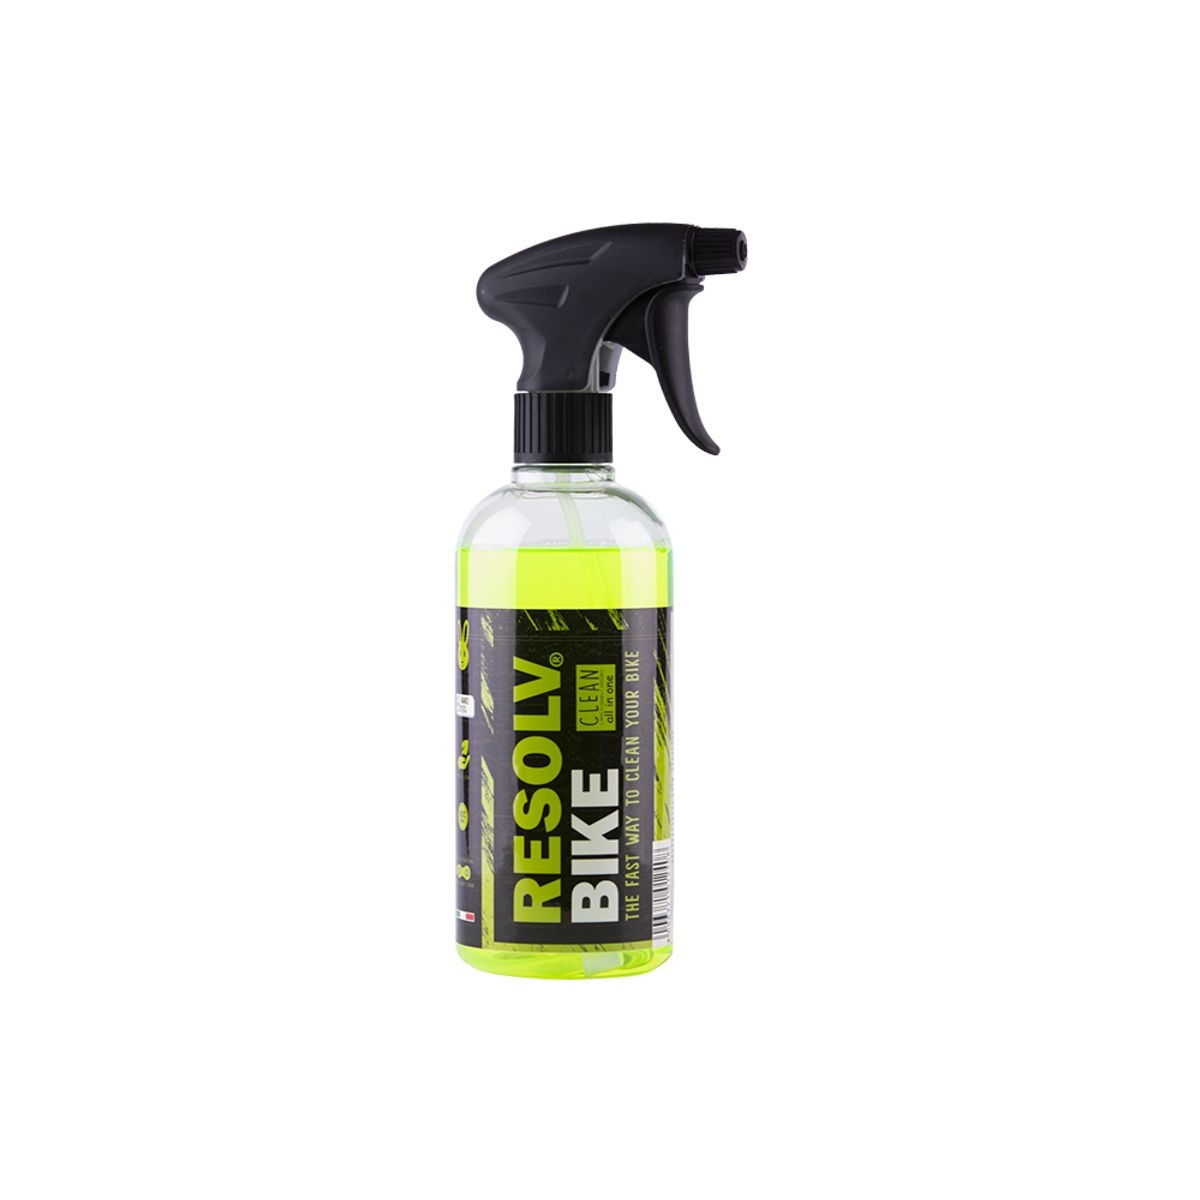 Clean Detergent For Bike Cleaning 500ml